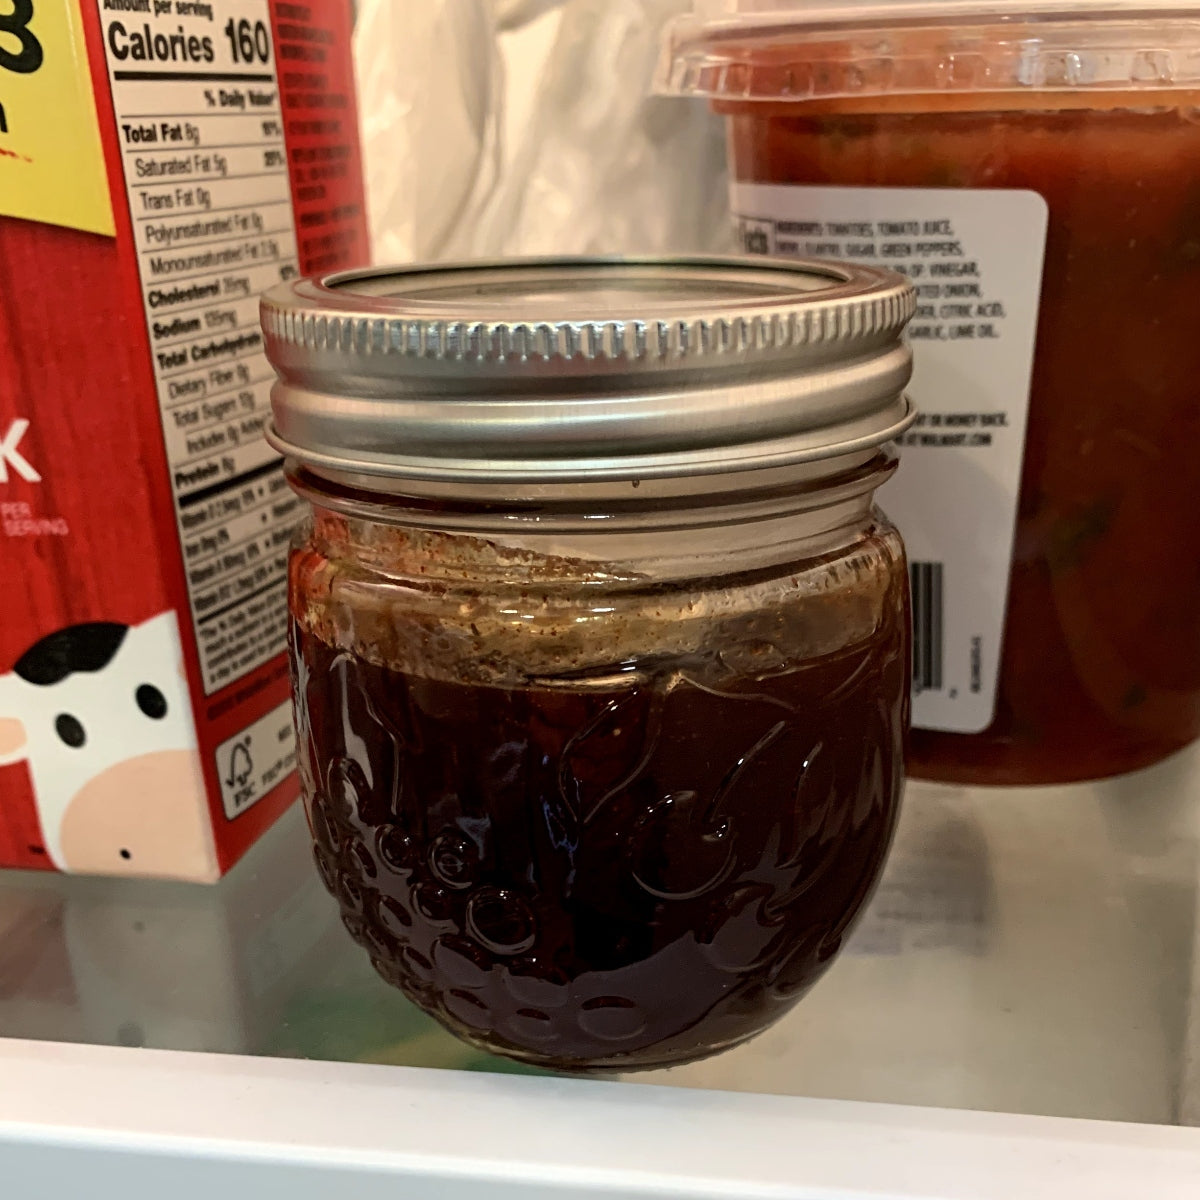 Honey chipotle sauce in a jar, sitting in the fridge.